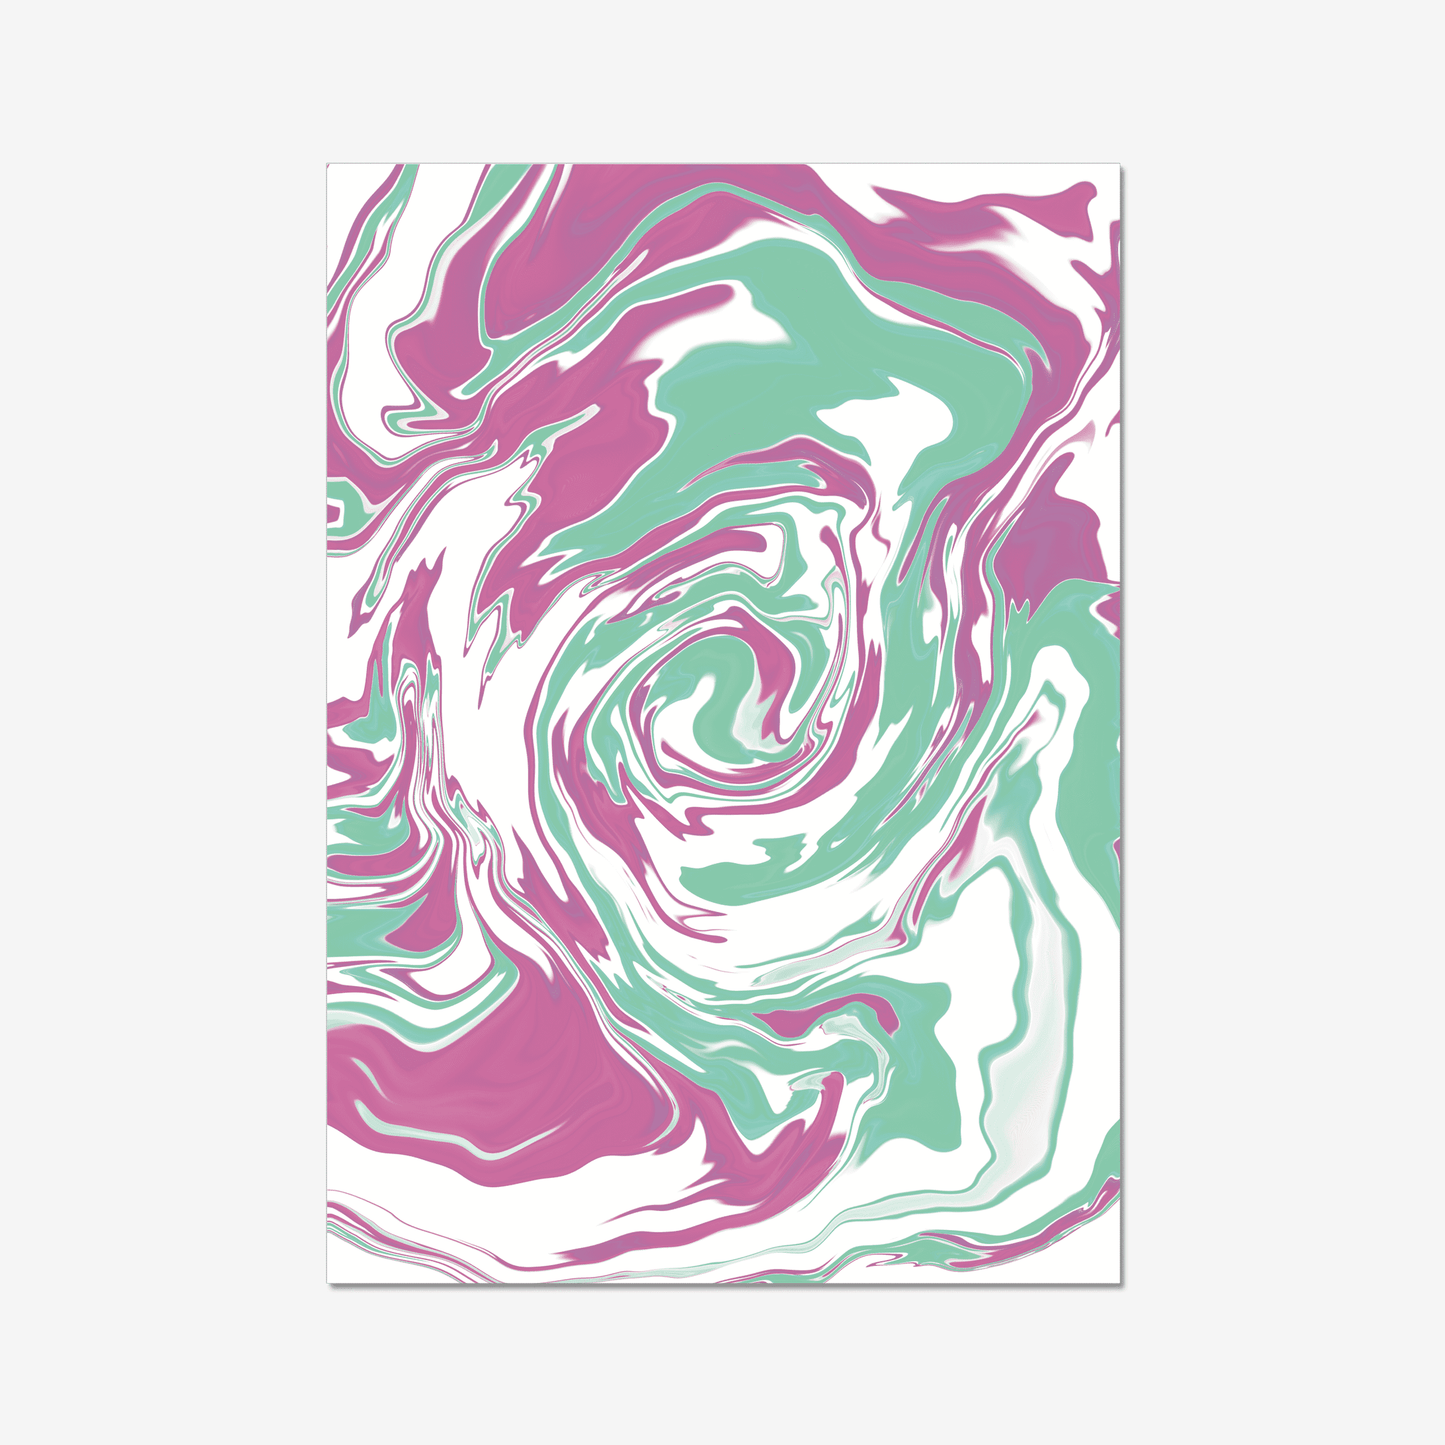 A fun marble effect print in cool pink and green tones, a perfect framed art print or poster, part of our Colourful Cali collection.  This is a statement dreamy print that would look as amazing in the bedroom as it would in the kitchen!